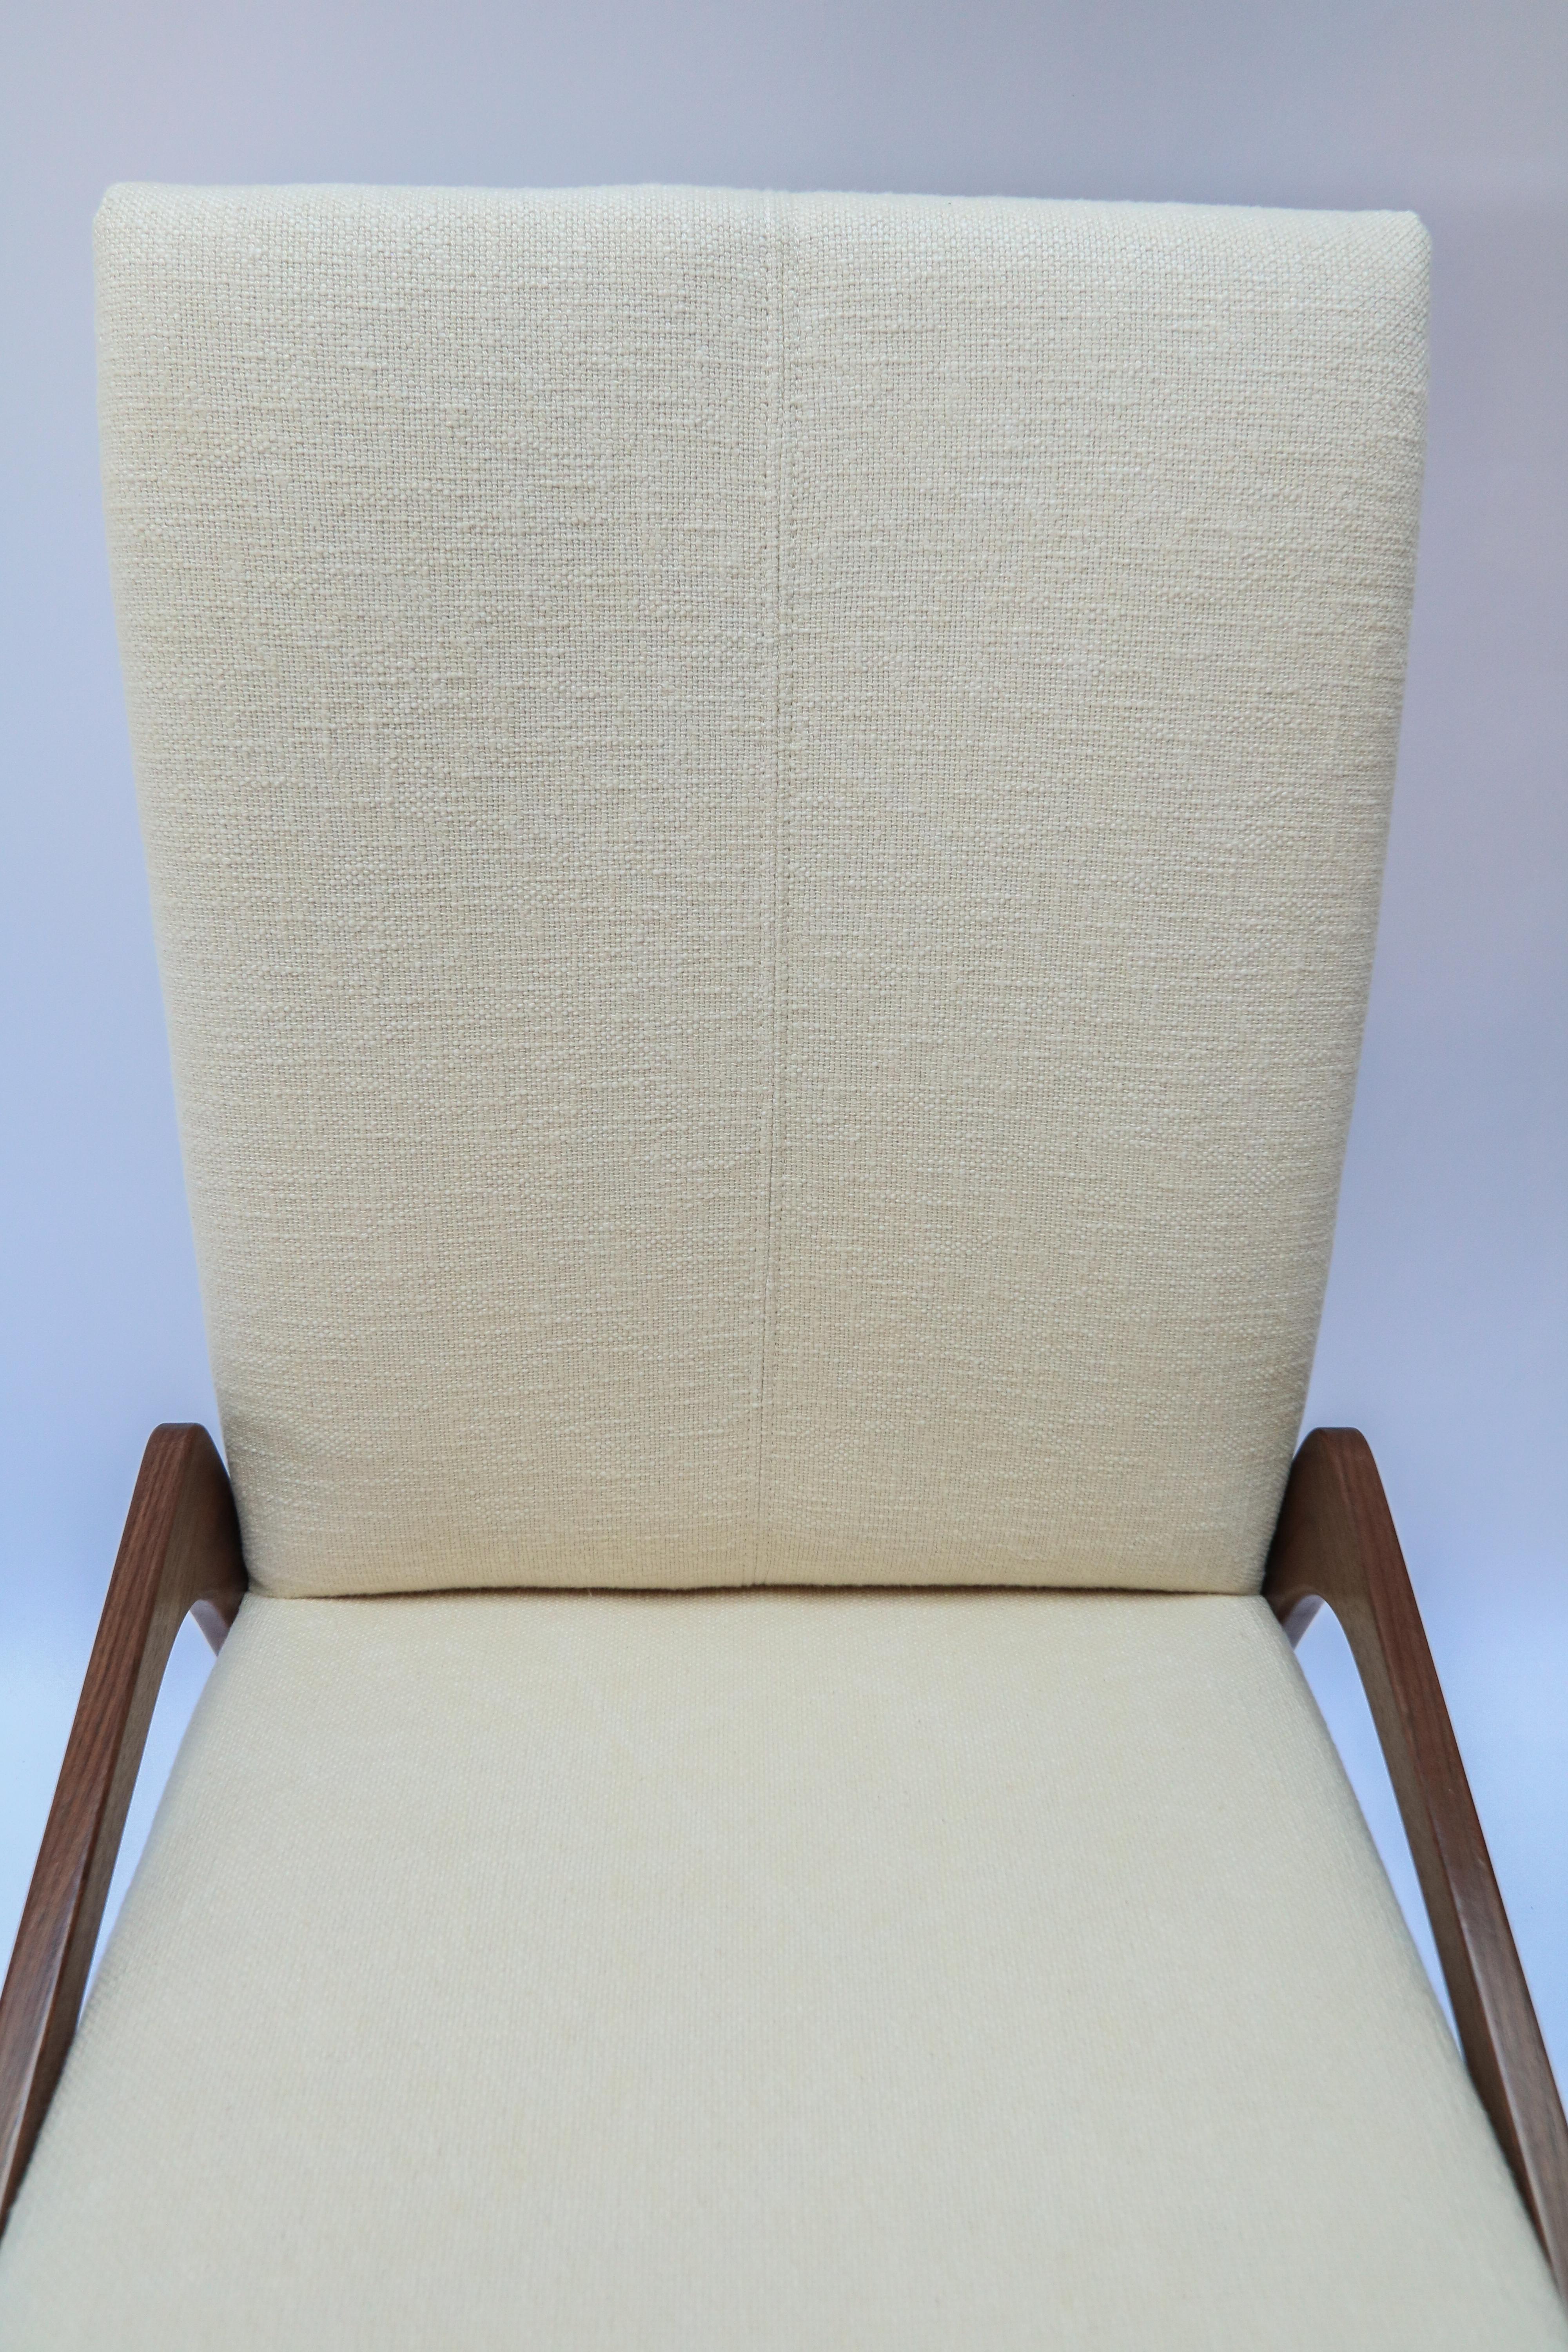 Custom Midcentury Style Walnut Dining Chairs in Ivory Linen by Adesso Imports For Sale 4